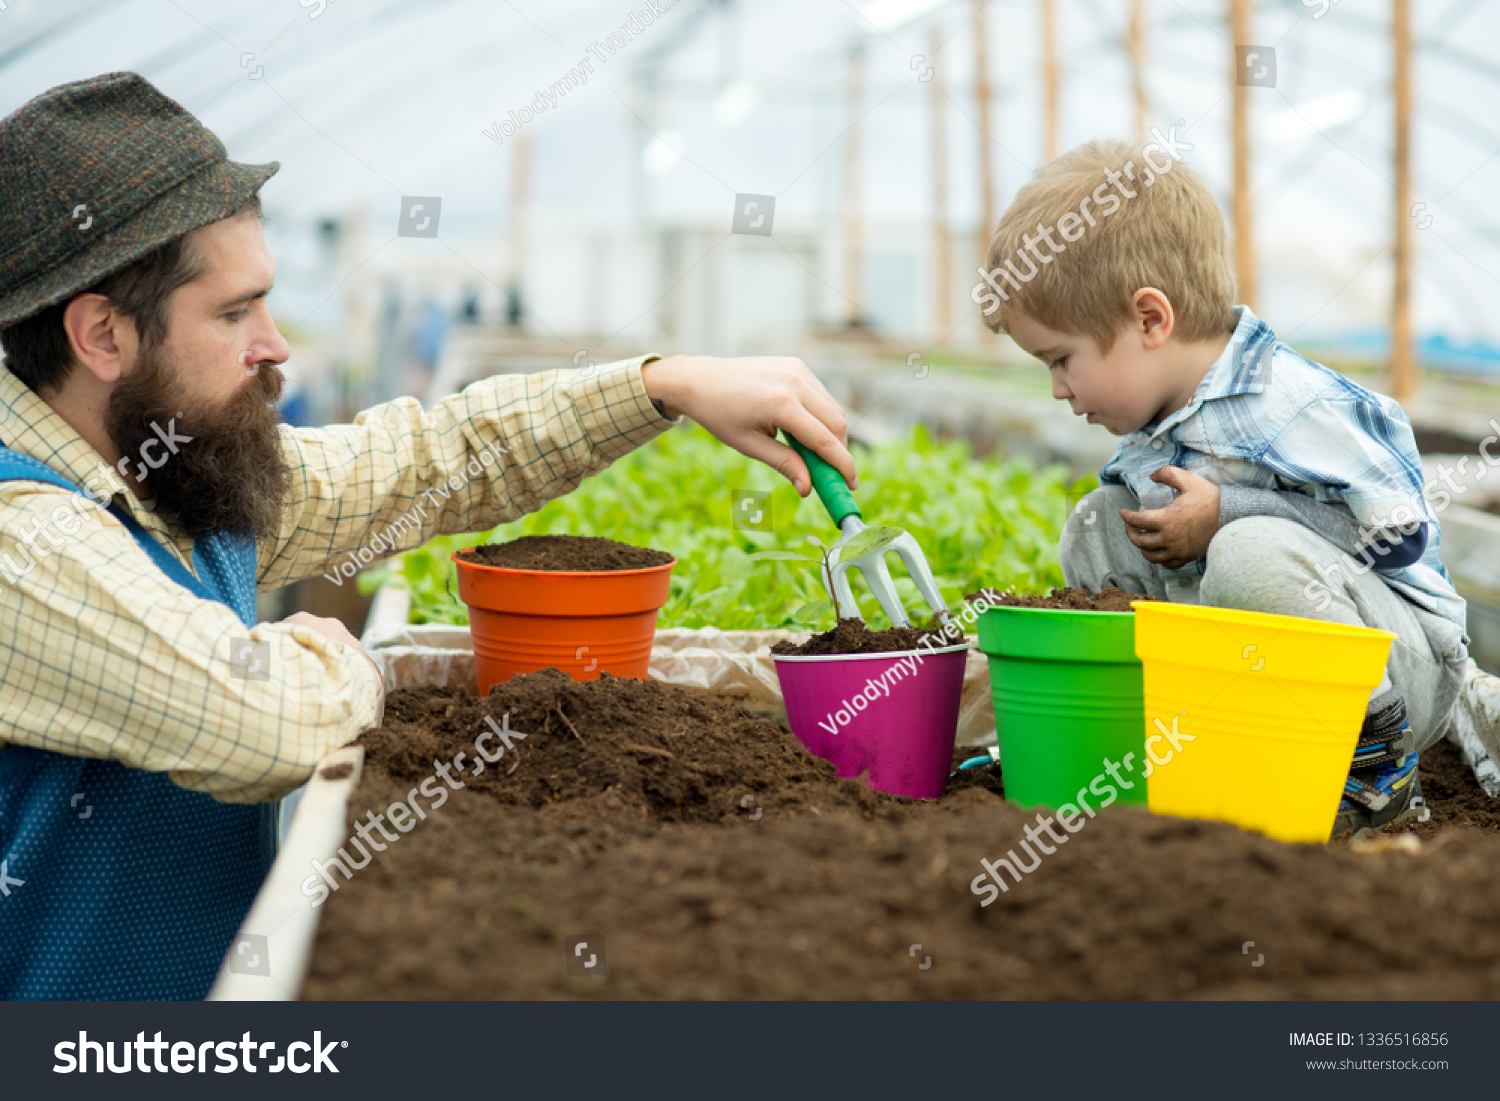 planting together. father and son planting together in greenhouse. happy family planting together. planting flowers together in graden orangery. taking good care of plants #1336516856